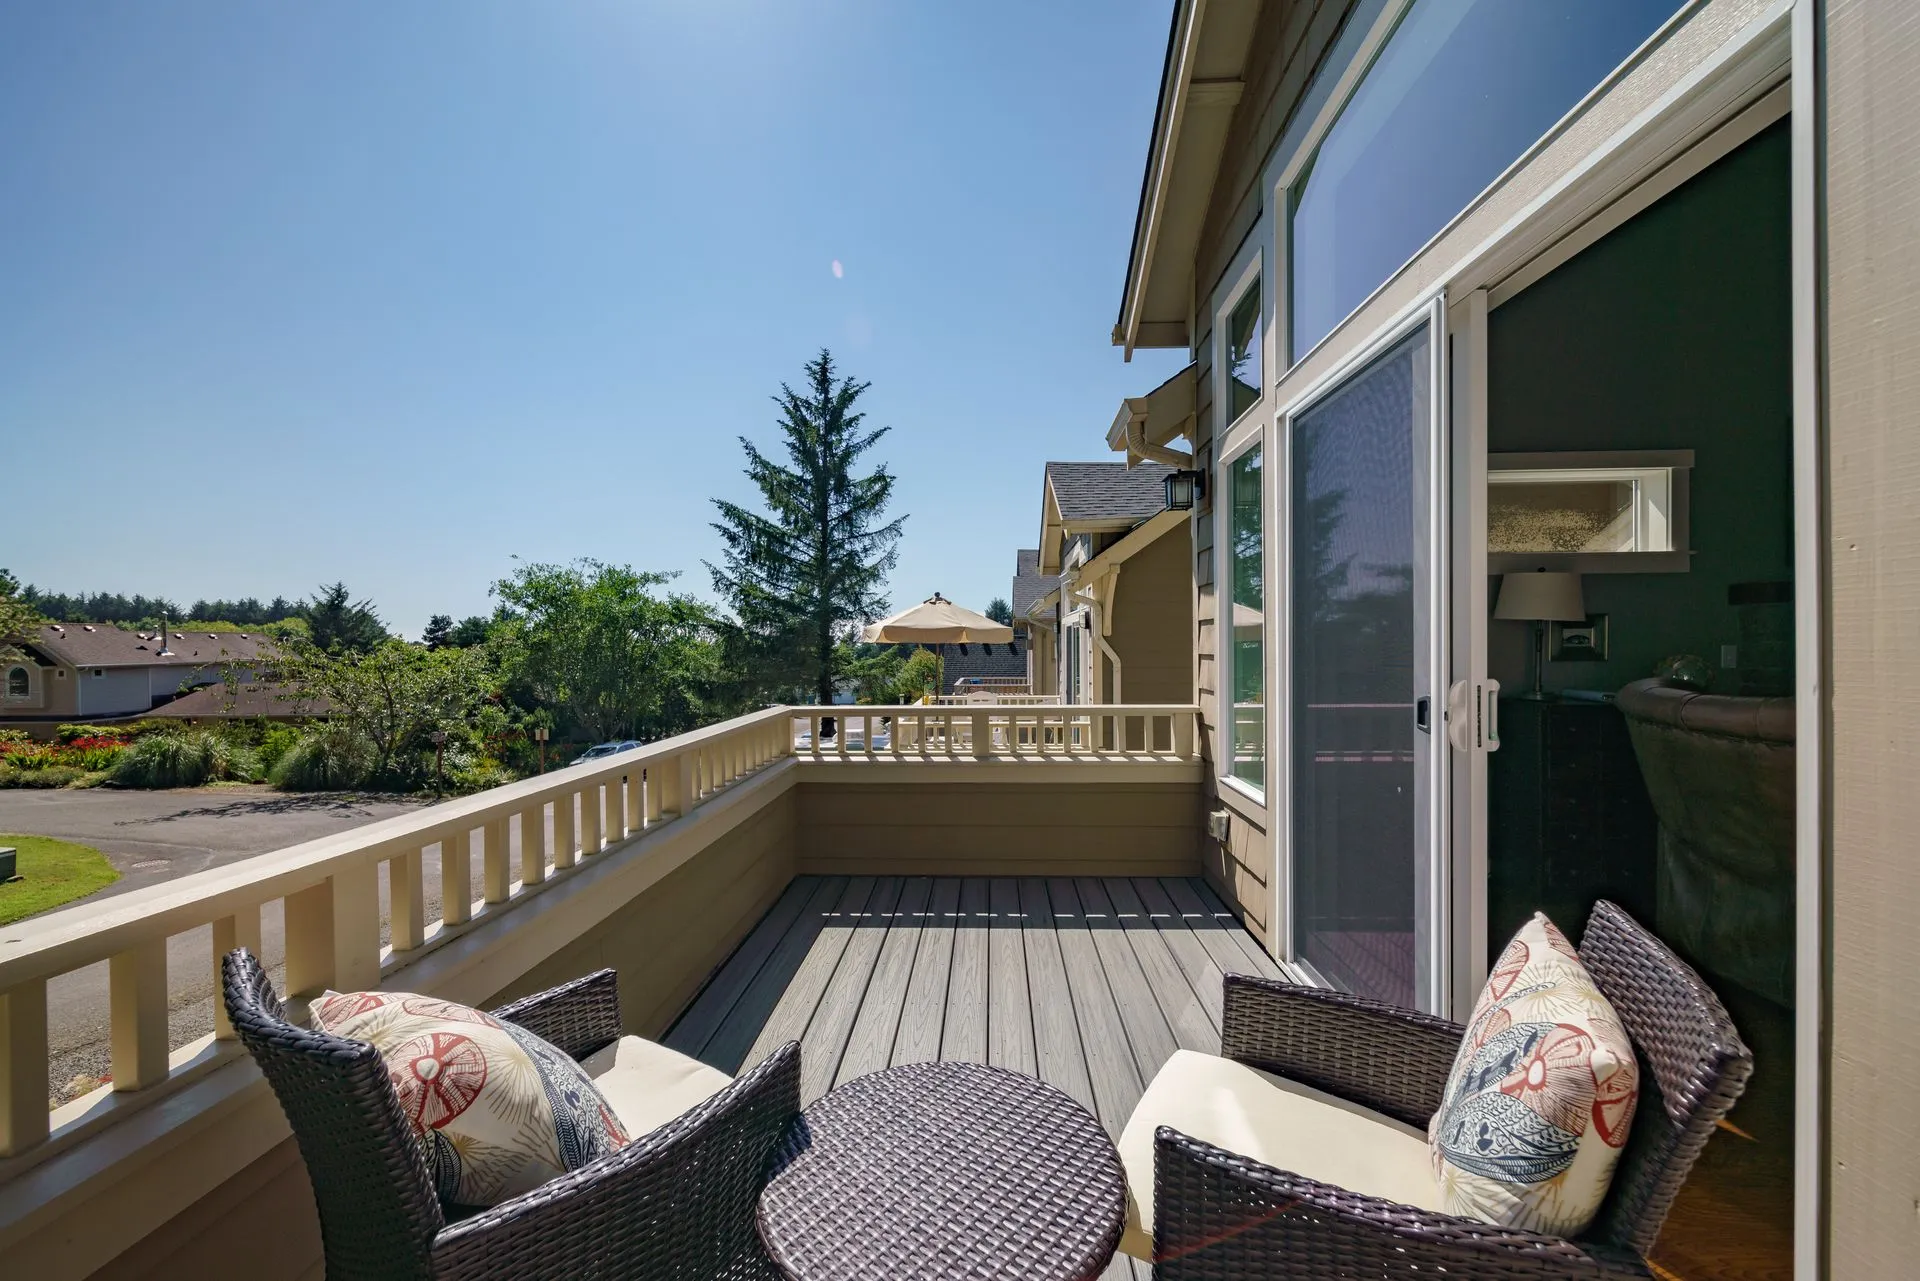 Vacation Rental in Cannon Beach, Seven Spruce deck with chairs